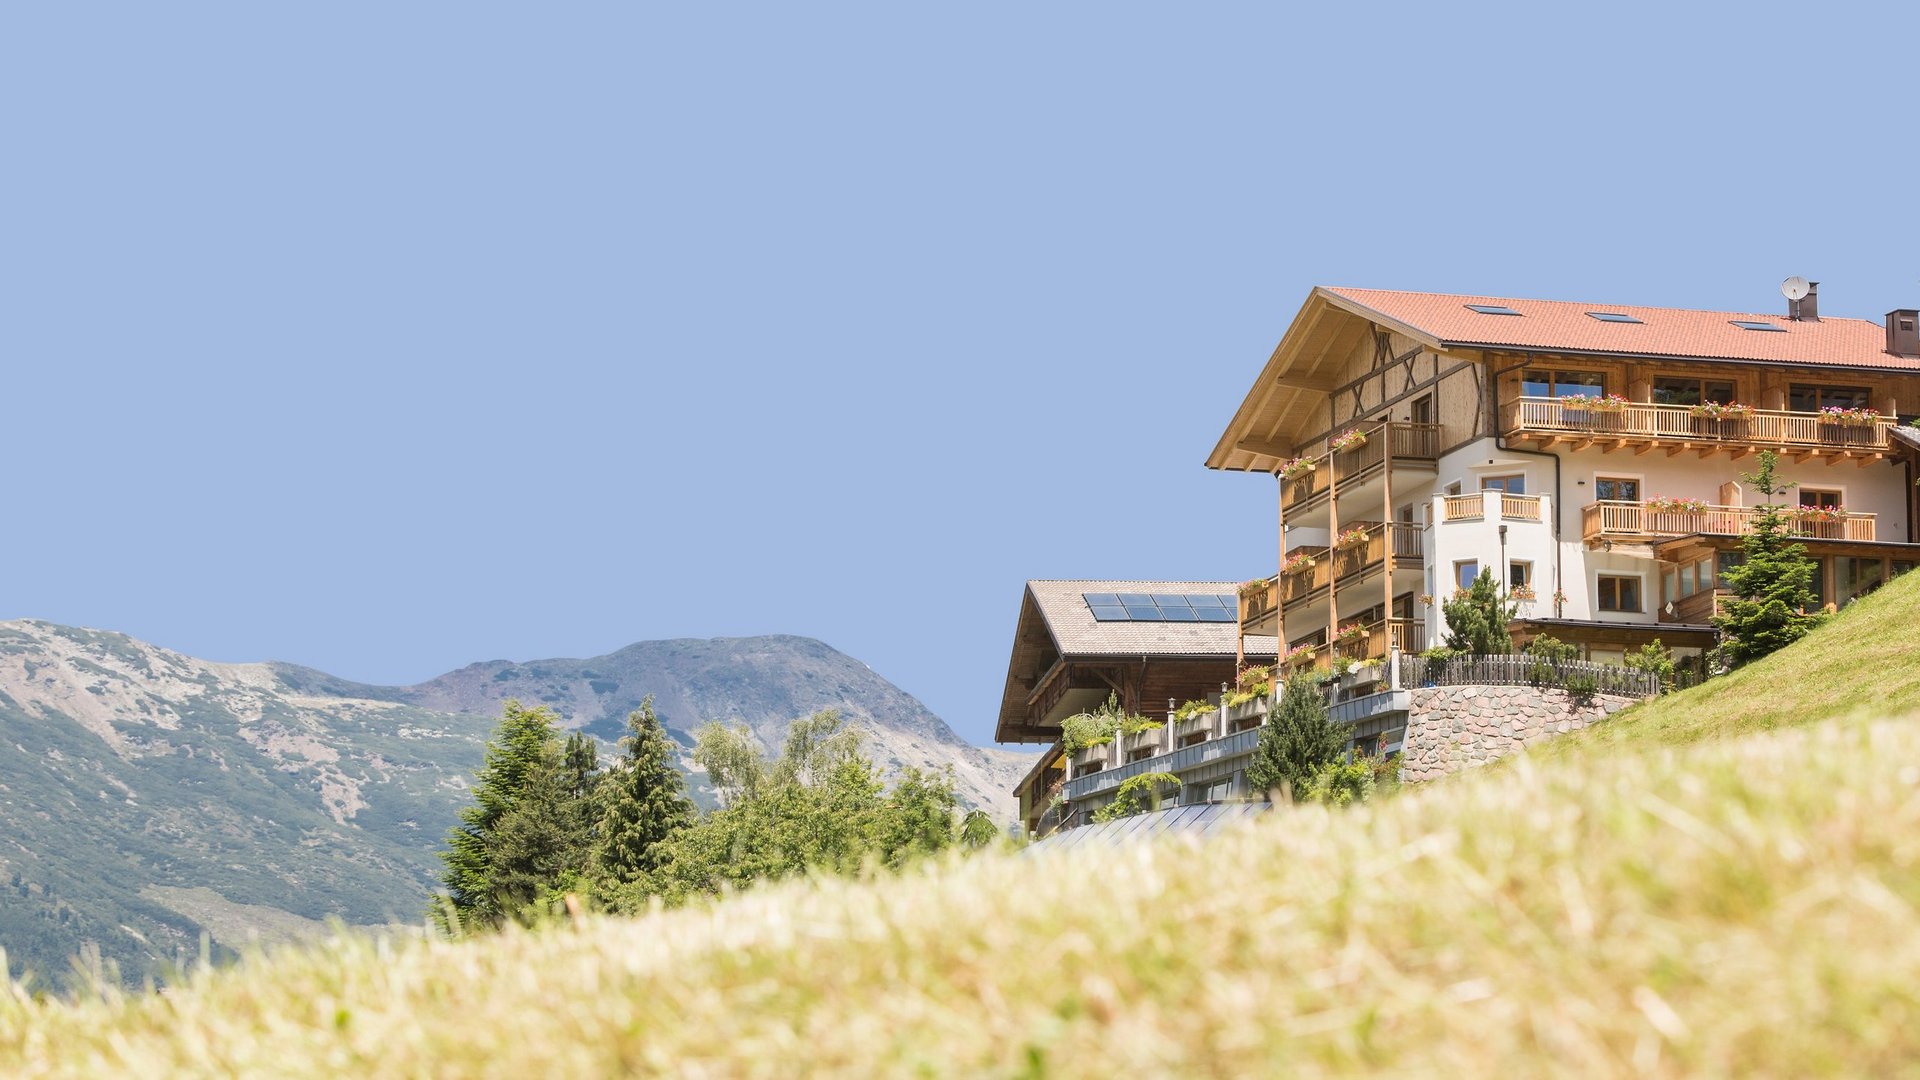 Sarntal: accommodation for families and friends